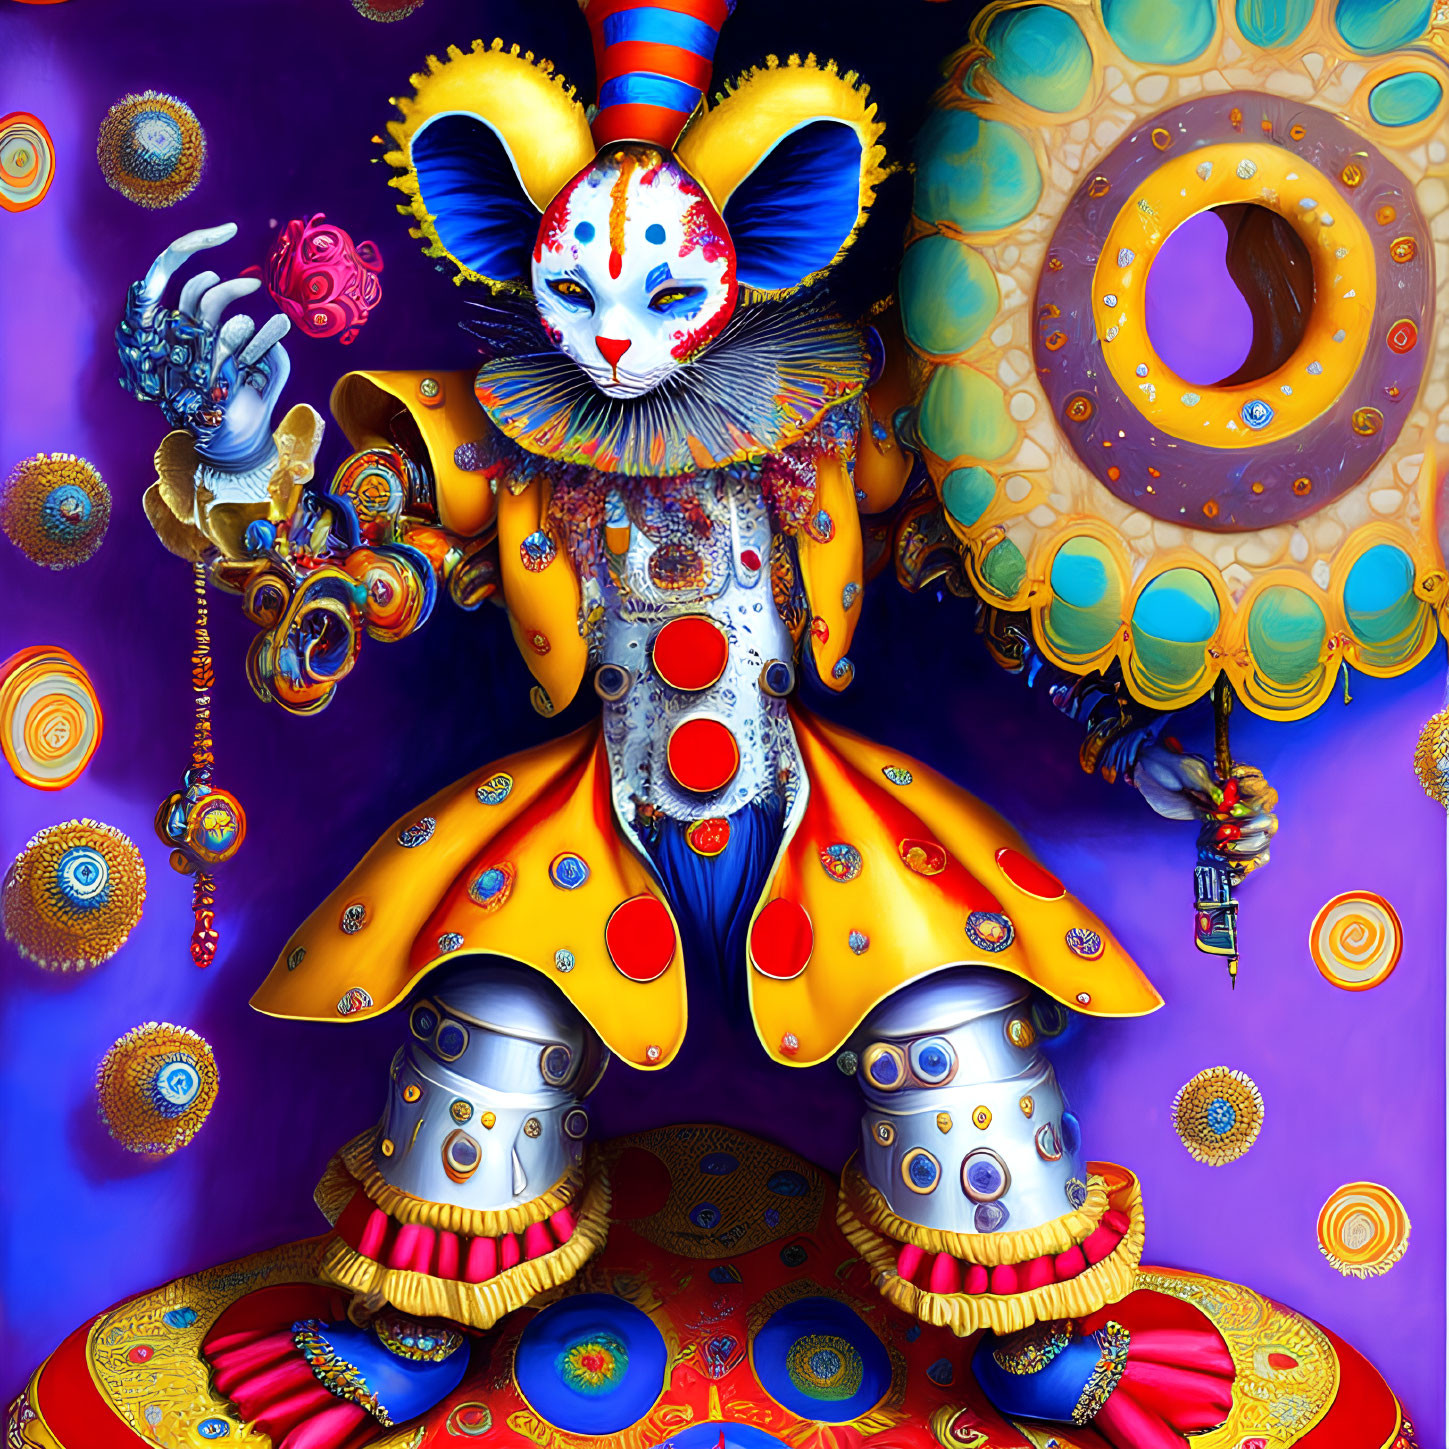 Colorful Clown-Like Figure in Jester Outfit with Abstract Patterns